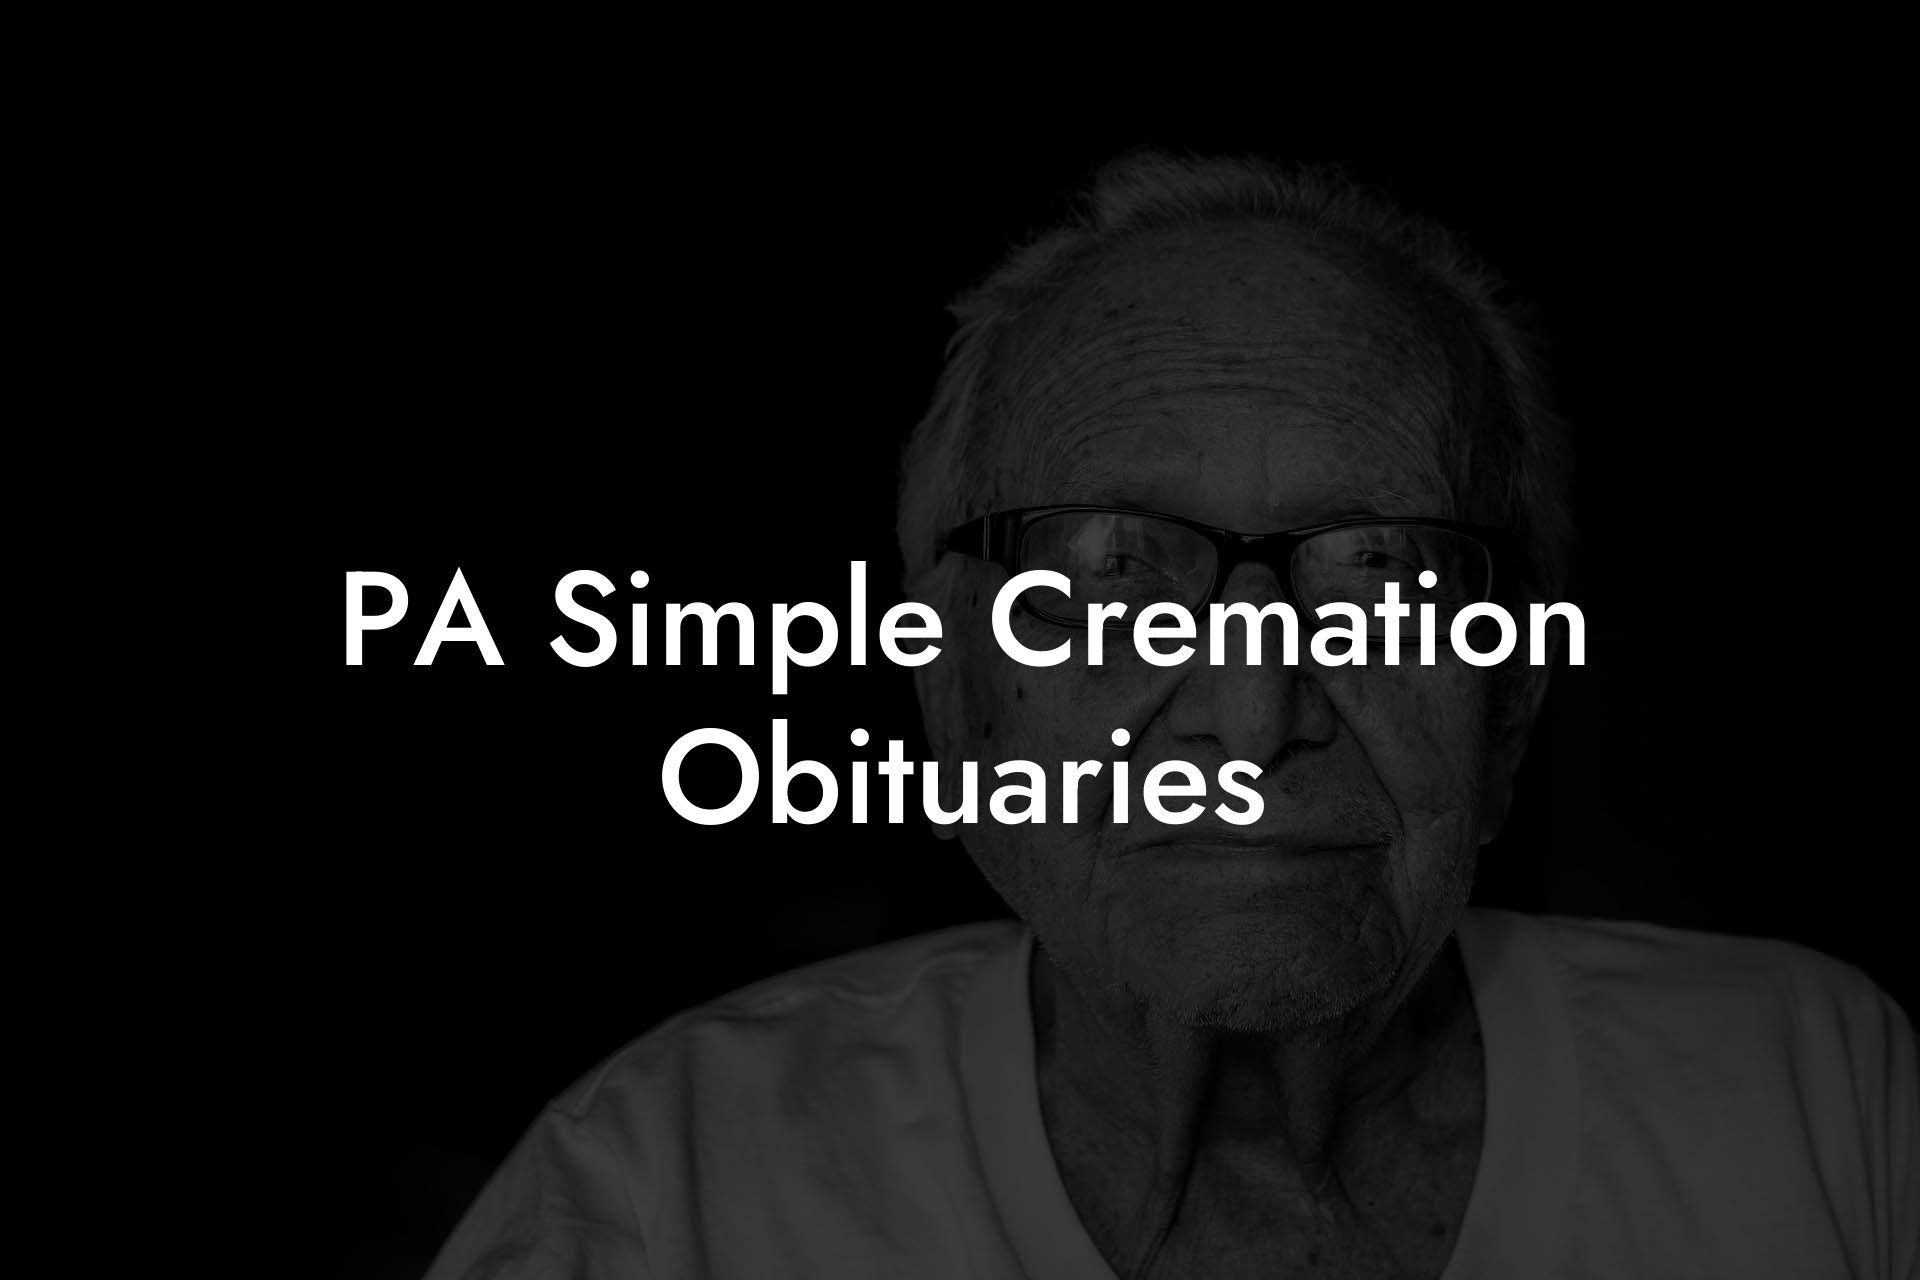 PA Simple Cremation Obituaries